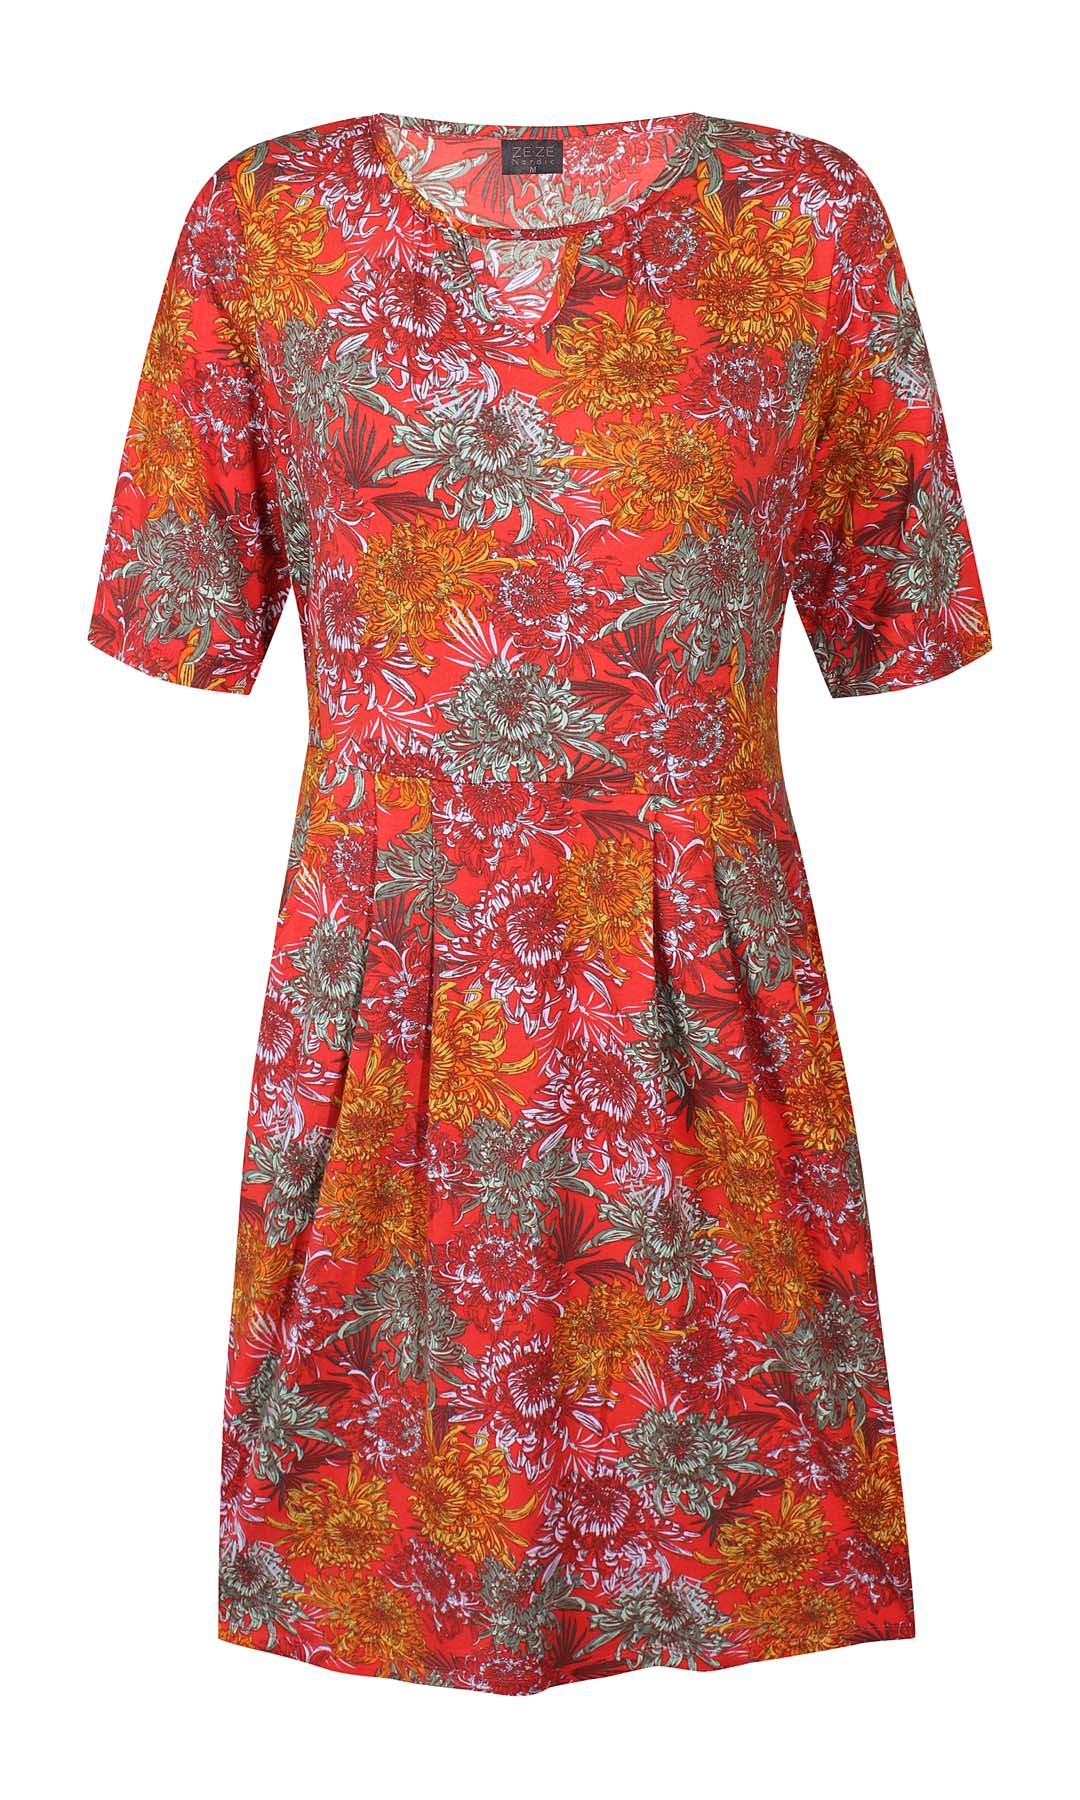 Fia 197: Floral Bobby-Style Dress in Red - Timeless Design with Elegant Finish| ZE-ZE